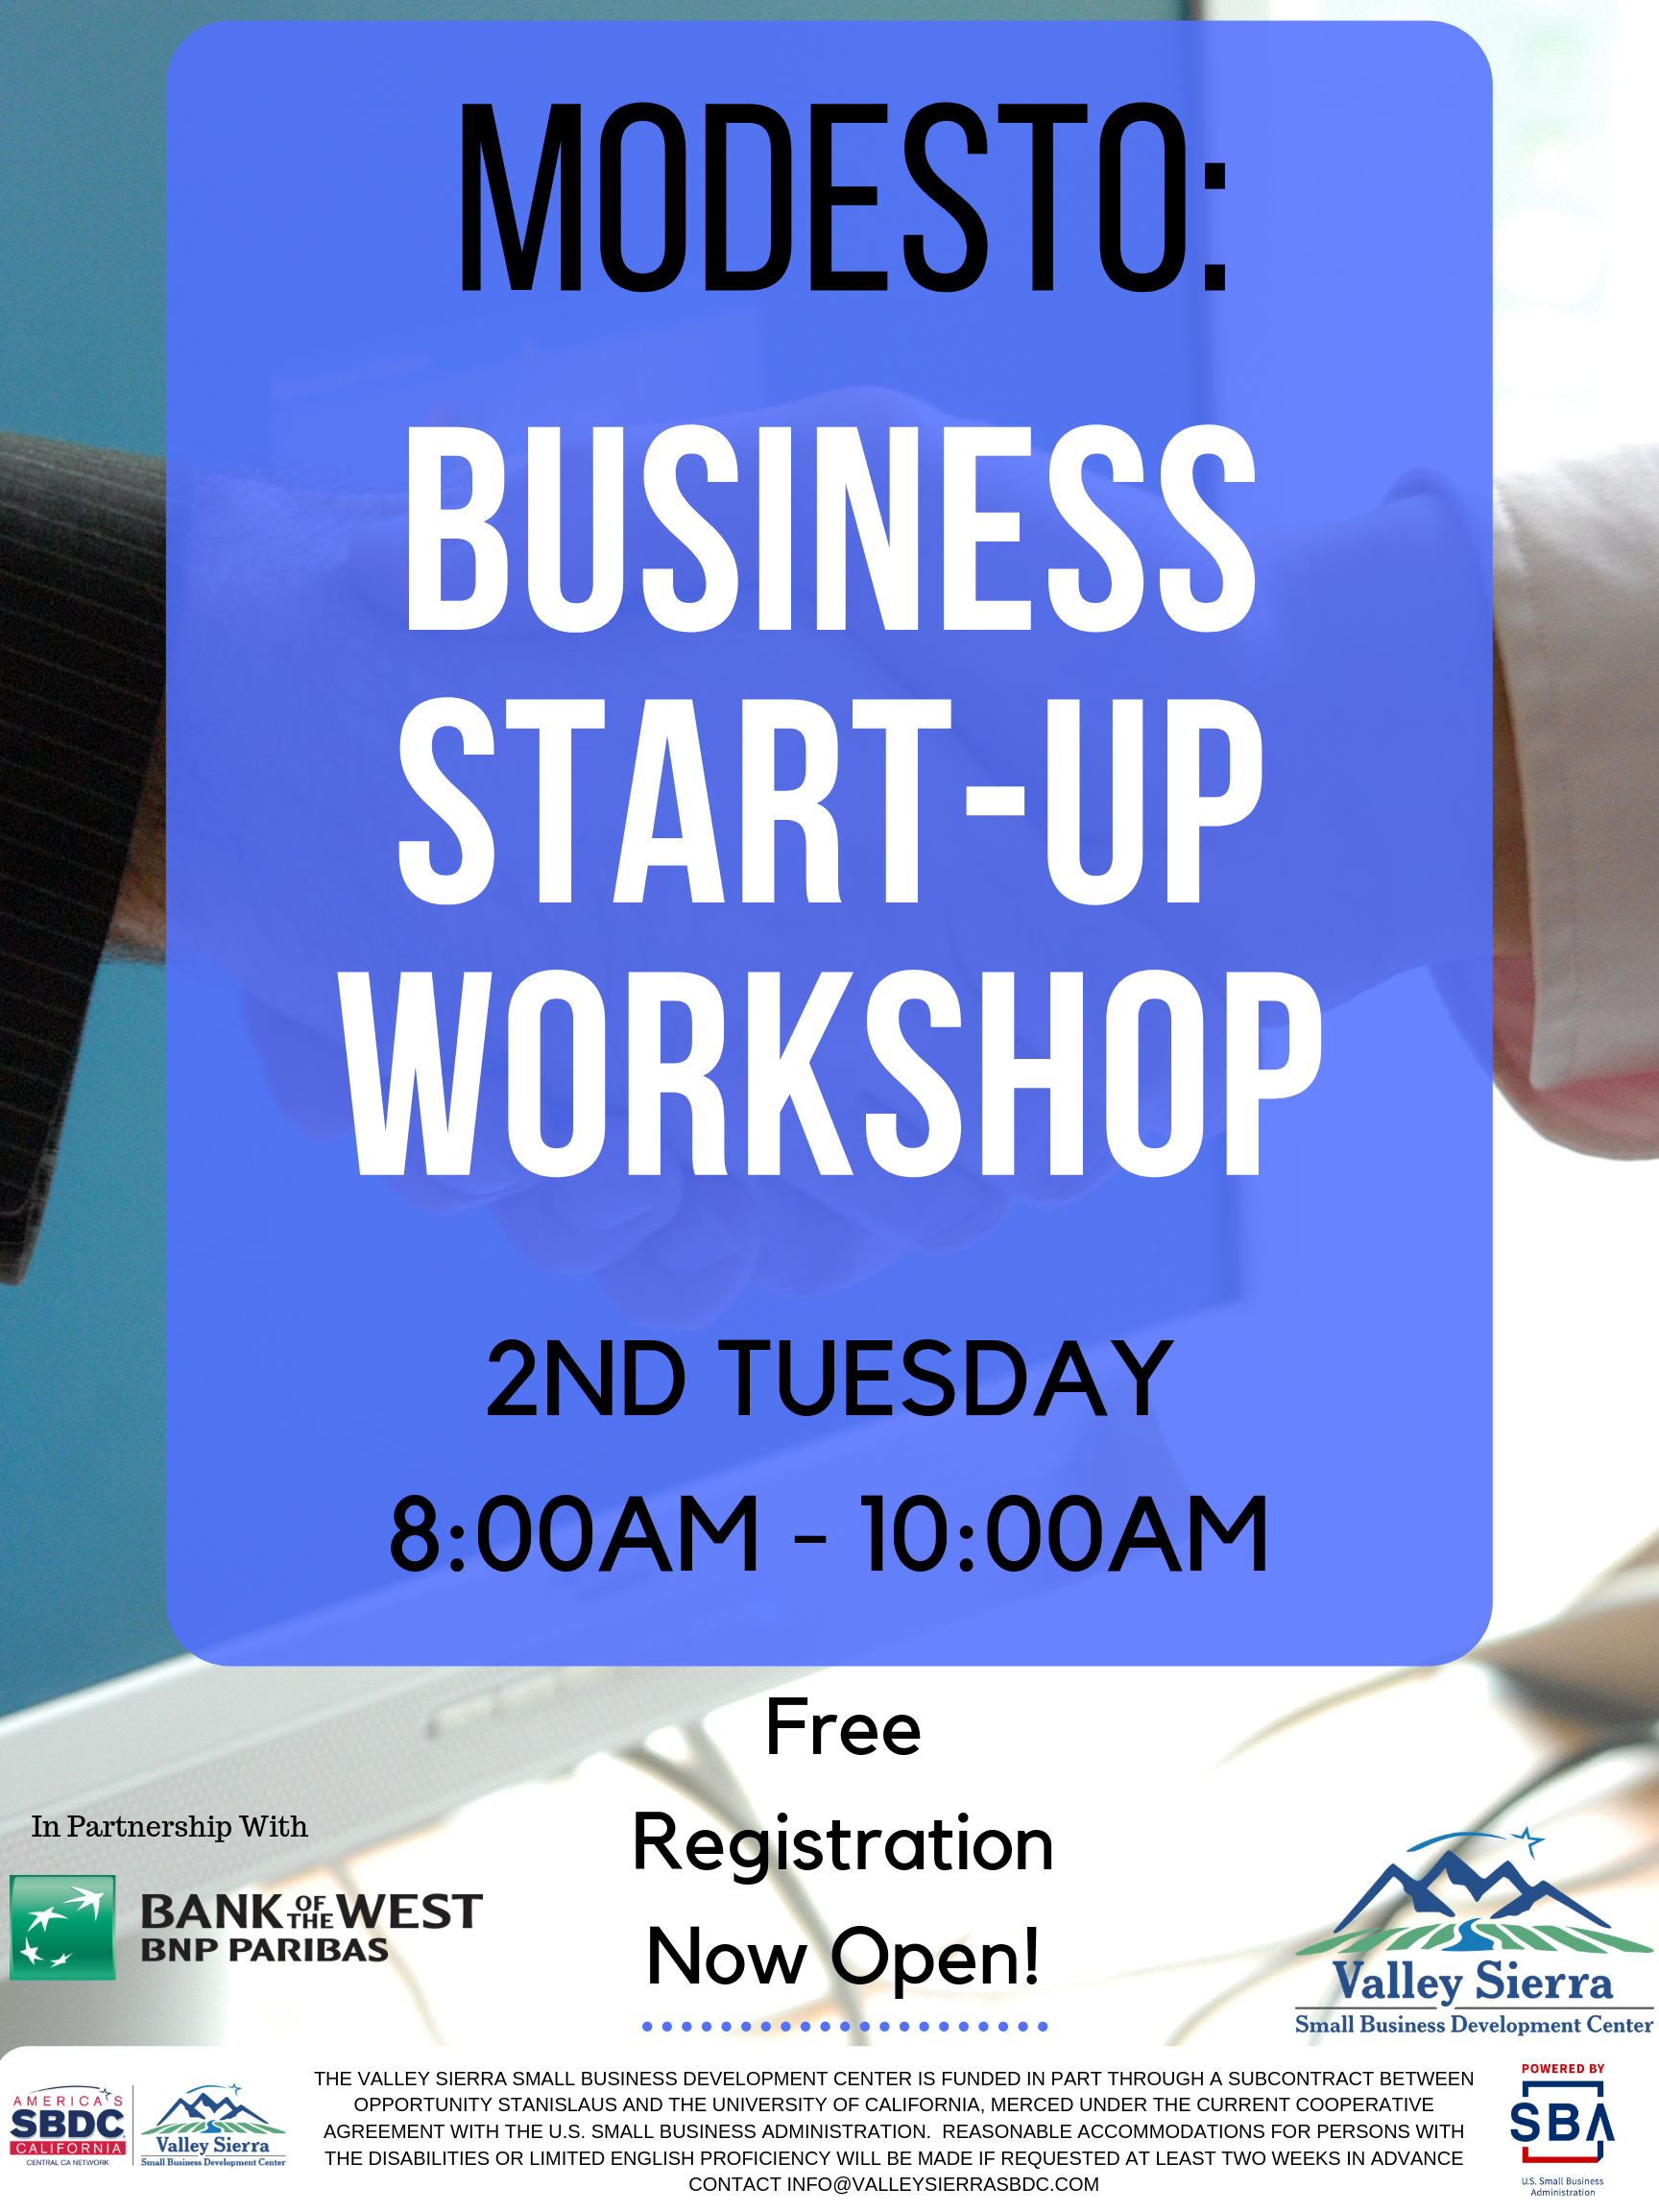 Event Flyer, Modesto: Business Start-Up Workshop, 2nd Tuesday, 8:00am - 10:00am. Free Registration Now Open! Tuesday, November 11th, 2019 at the Valley Sierra SBDC. 1625 I Street, Modesto, Ca.